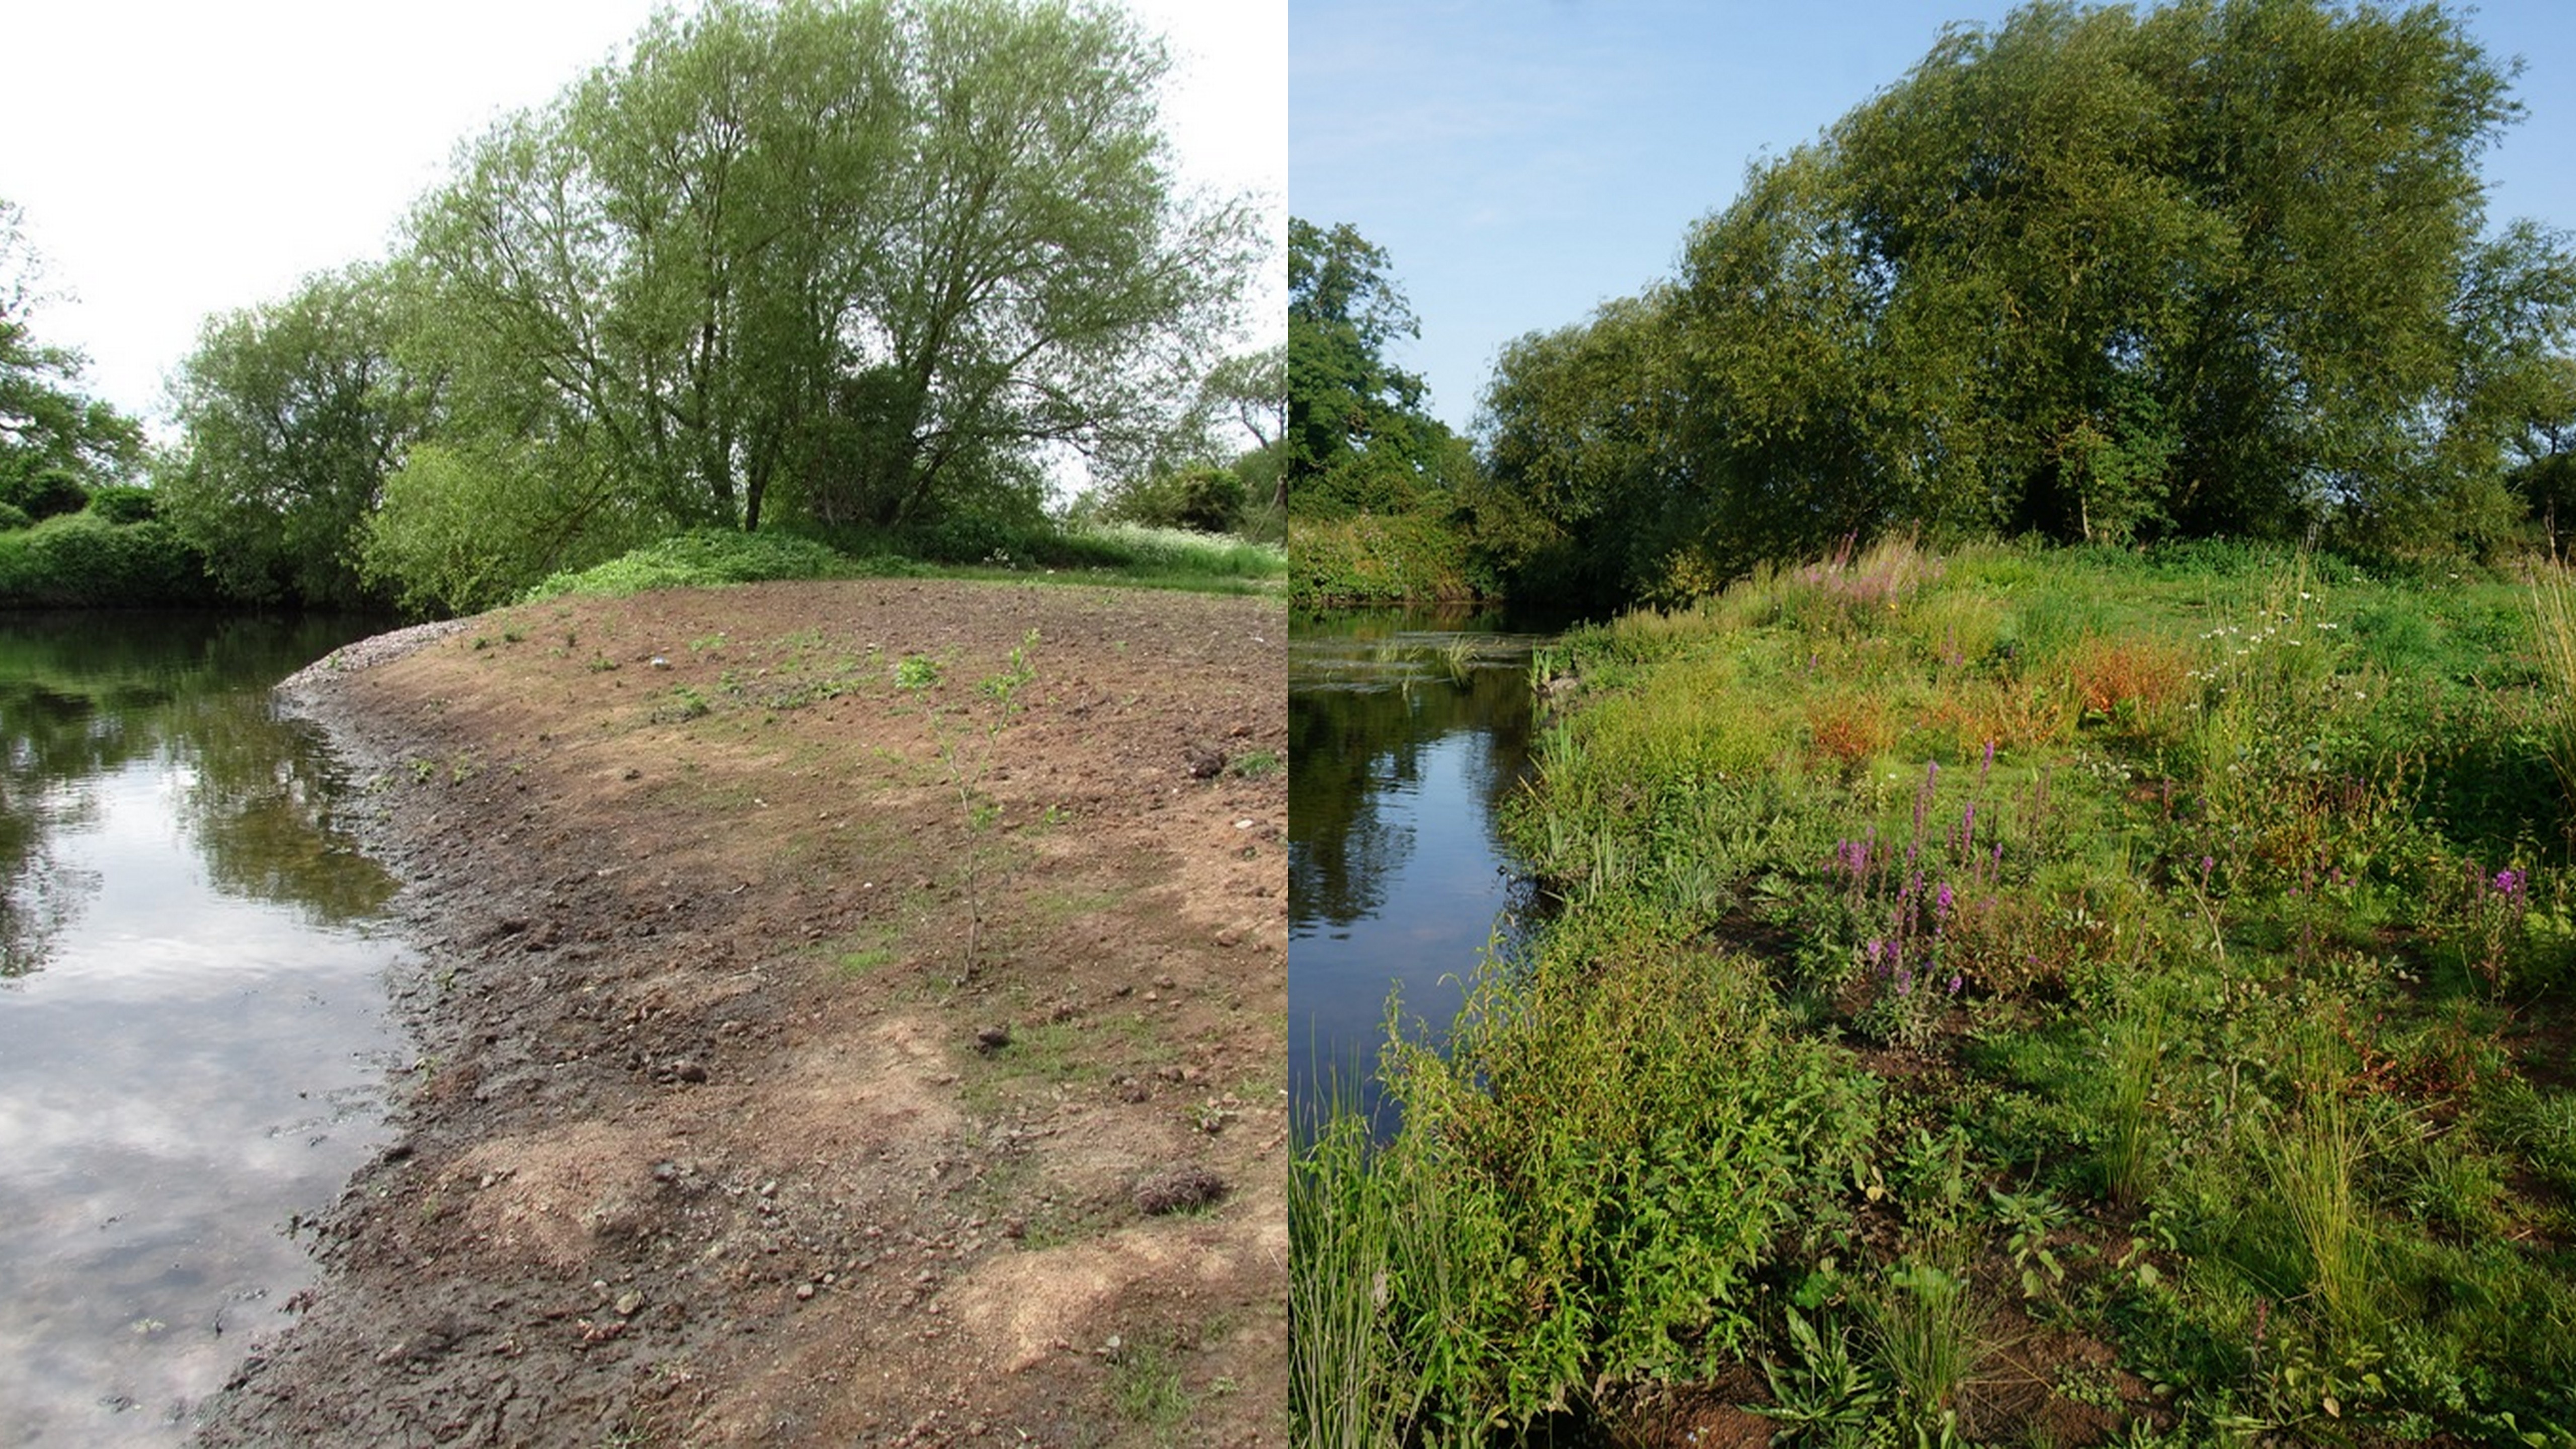 the bank of the River Tame arm at Tameside local nature reserve before and after Tameforce volunteers planted wildflowers © Tracey Doherty, Warwickshire Wildlife Trust 2017